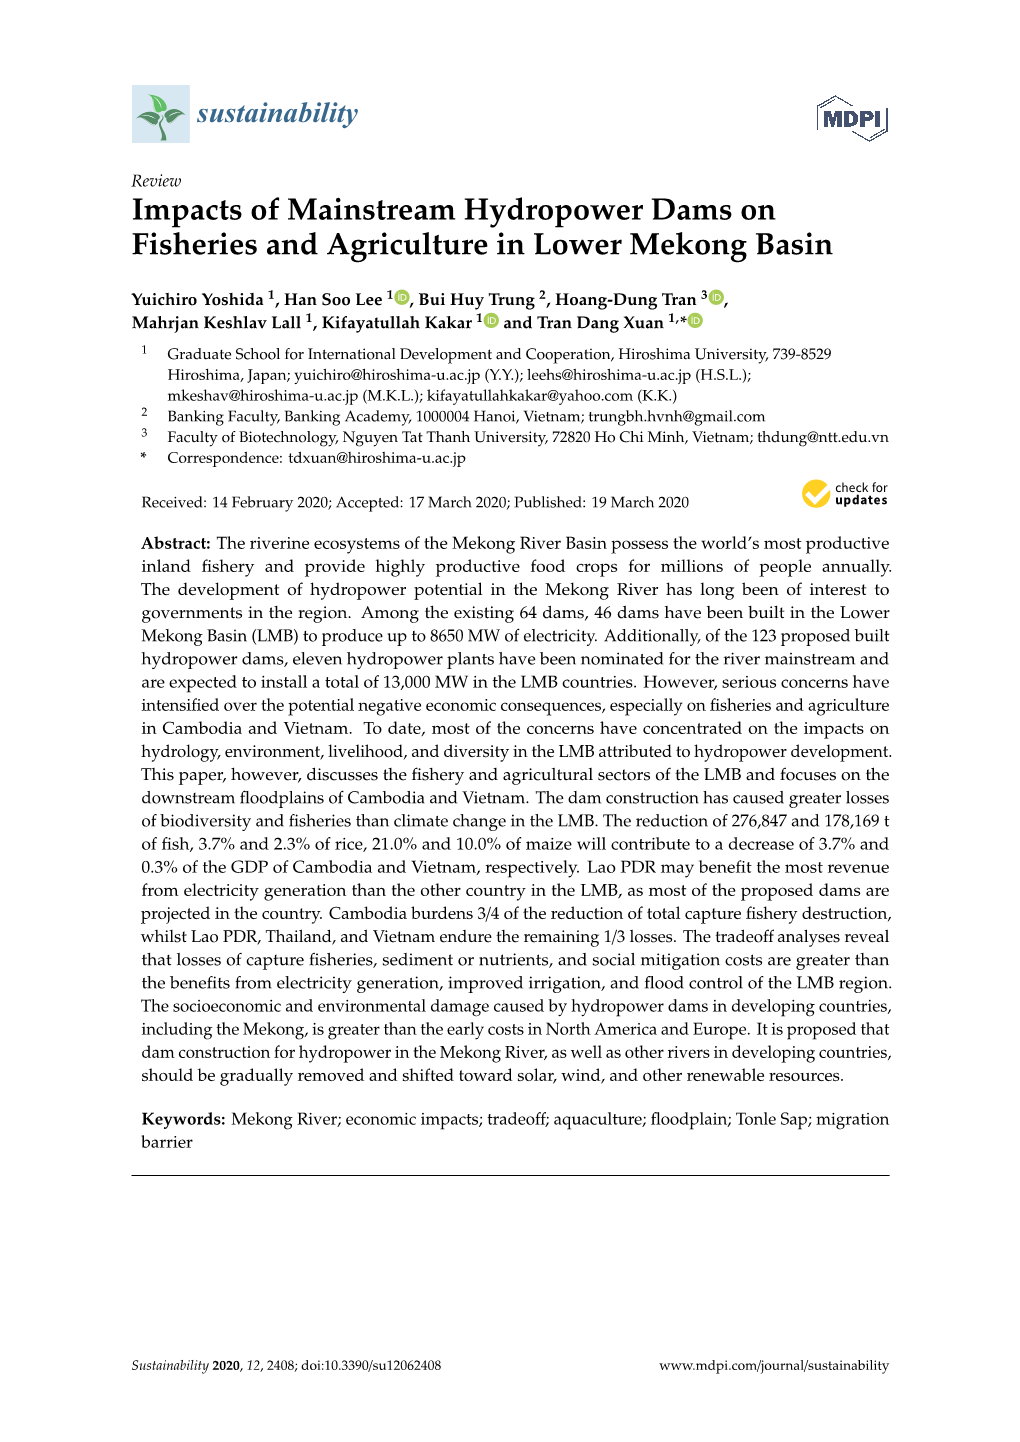 Impacts of Mainstream Hydropower Dams on Fisheries and Agriculture in Lower Mekong Basin